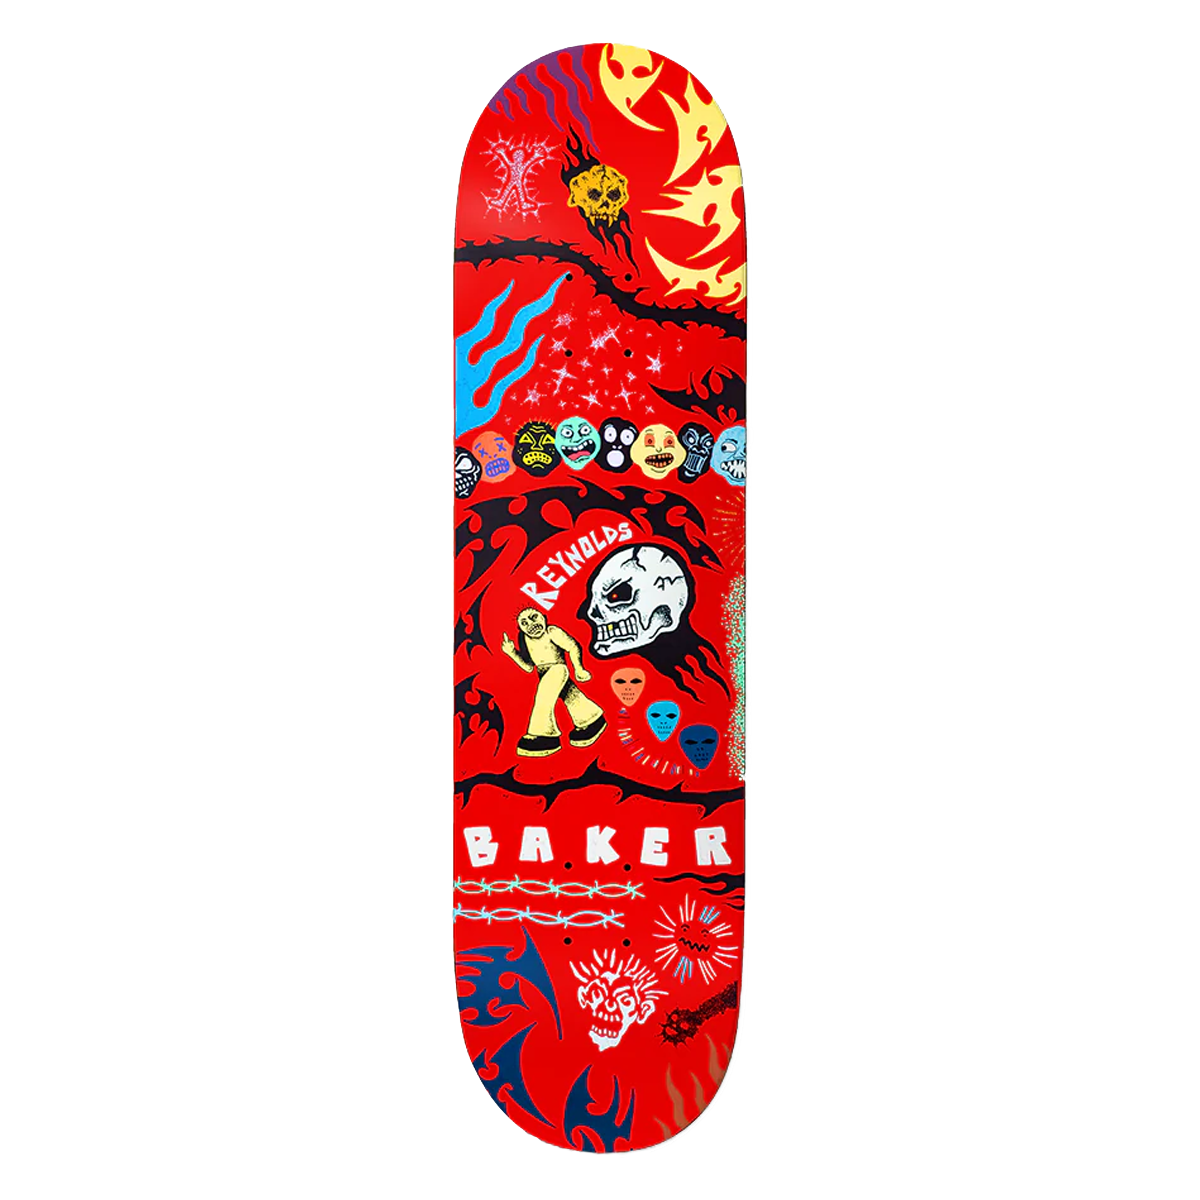 Baker Reynolds Another Thing Coming Skate Deck - 8.0